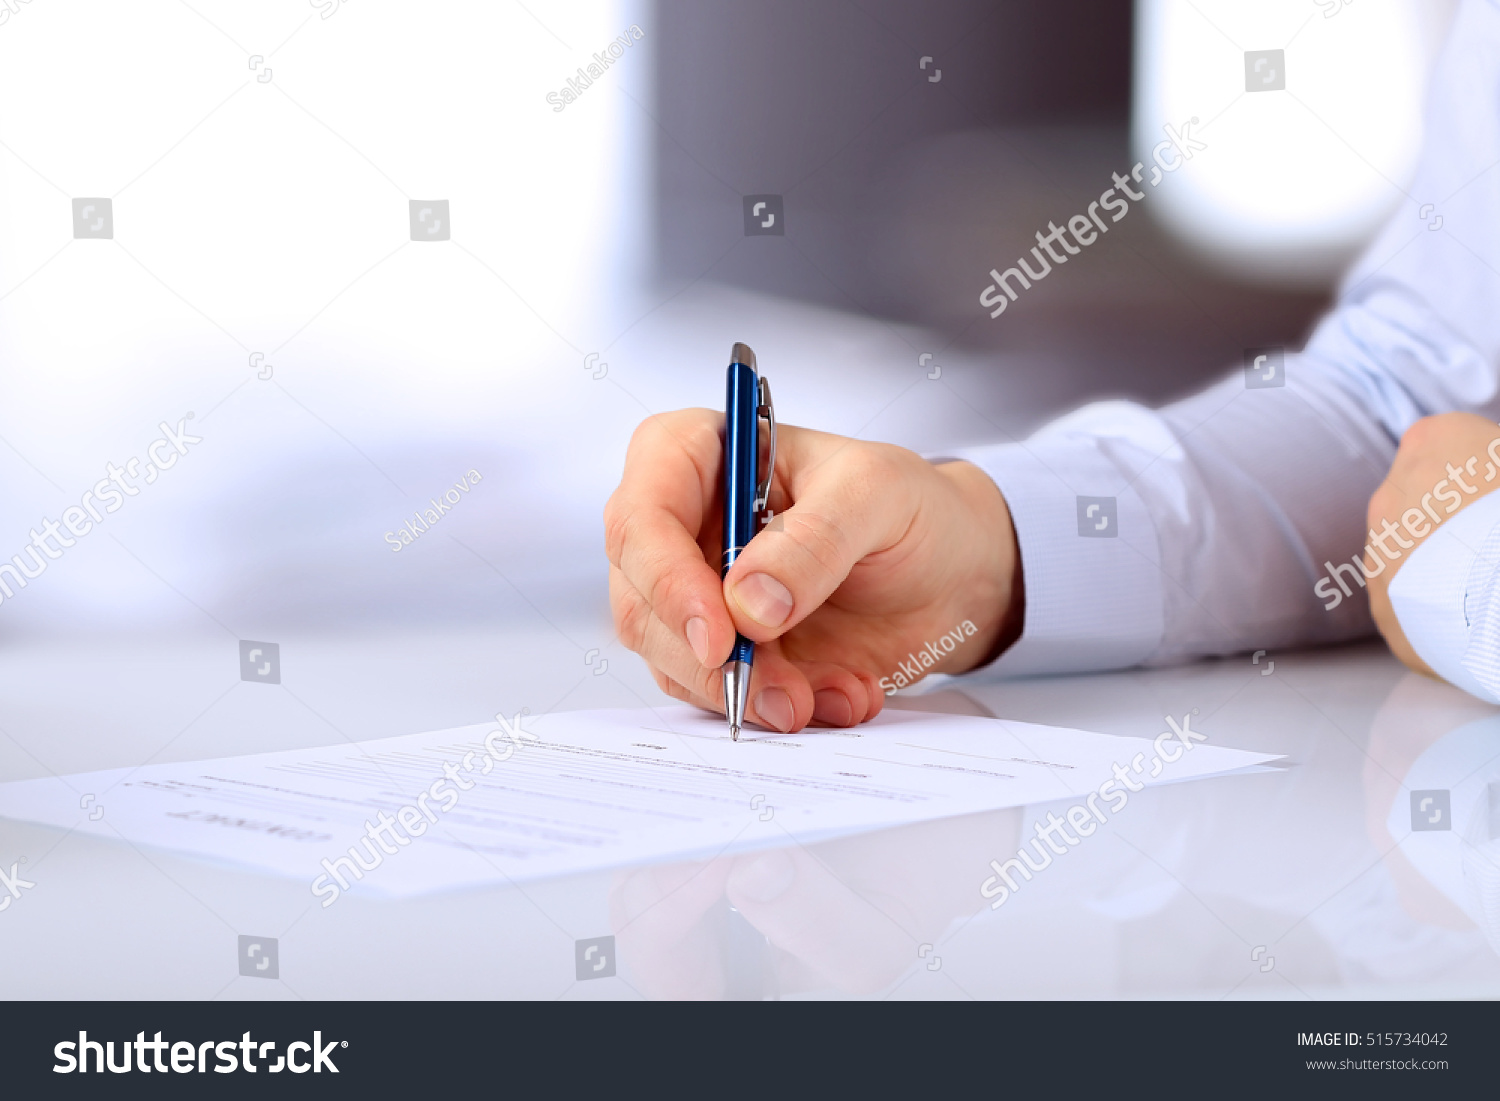 32,035 Filling contract Images, Stock Photos & Vectors | Shutterstock